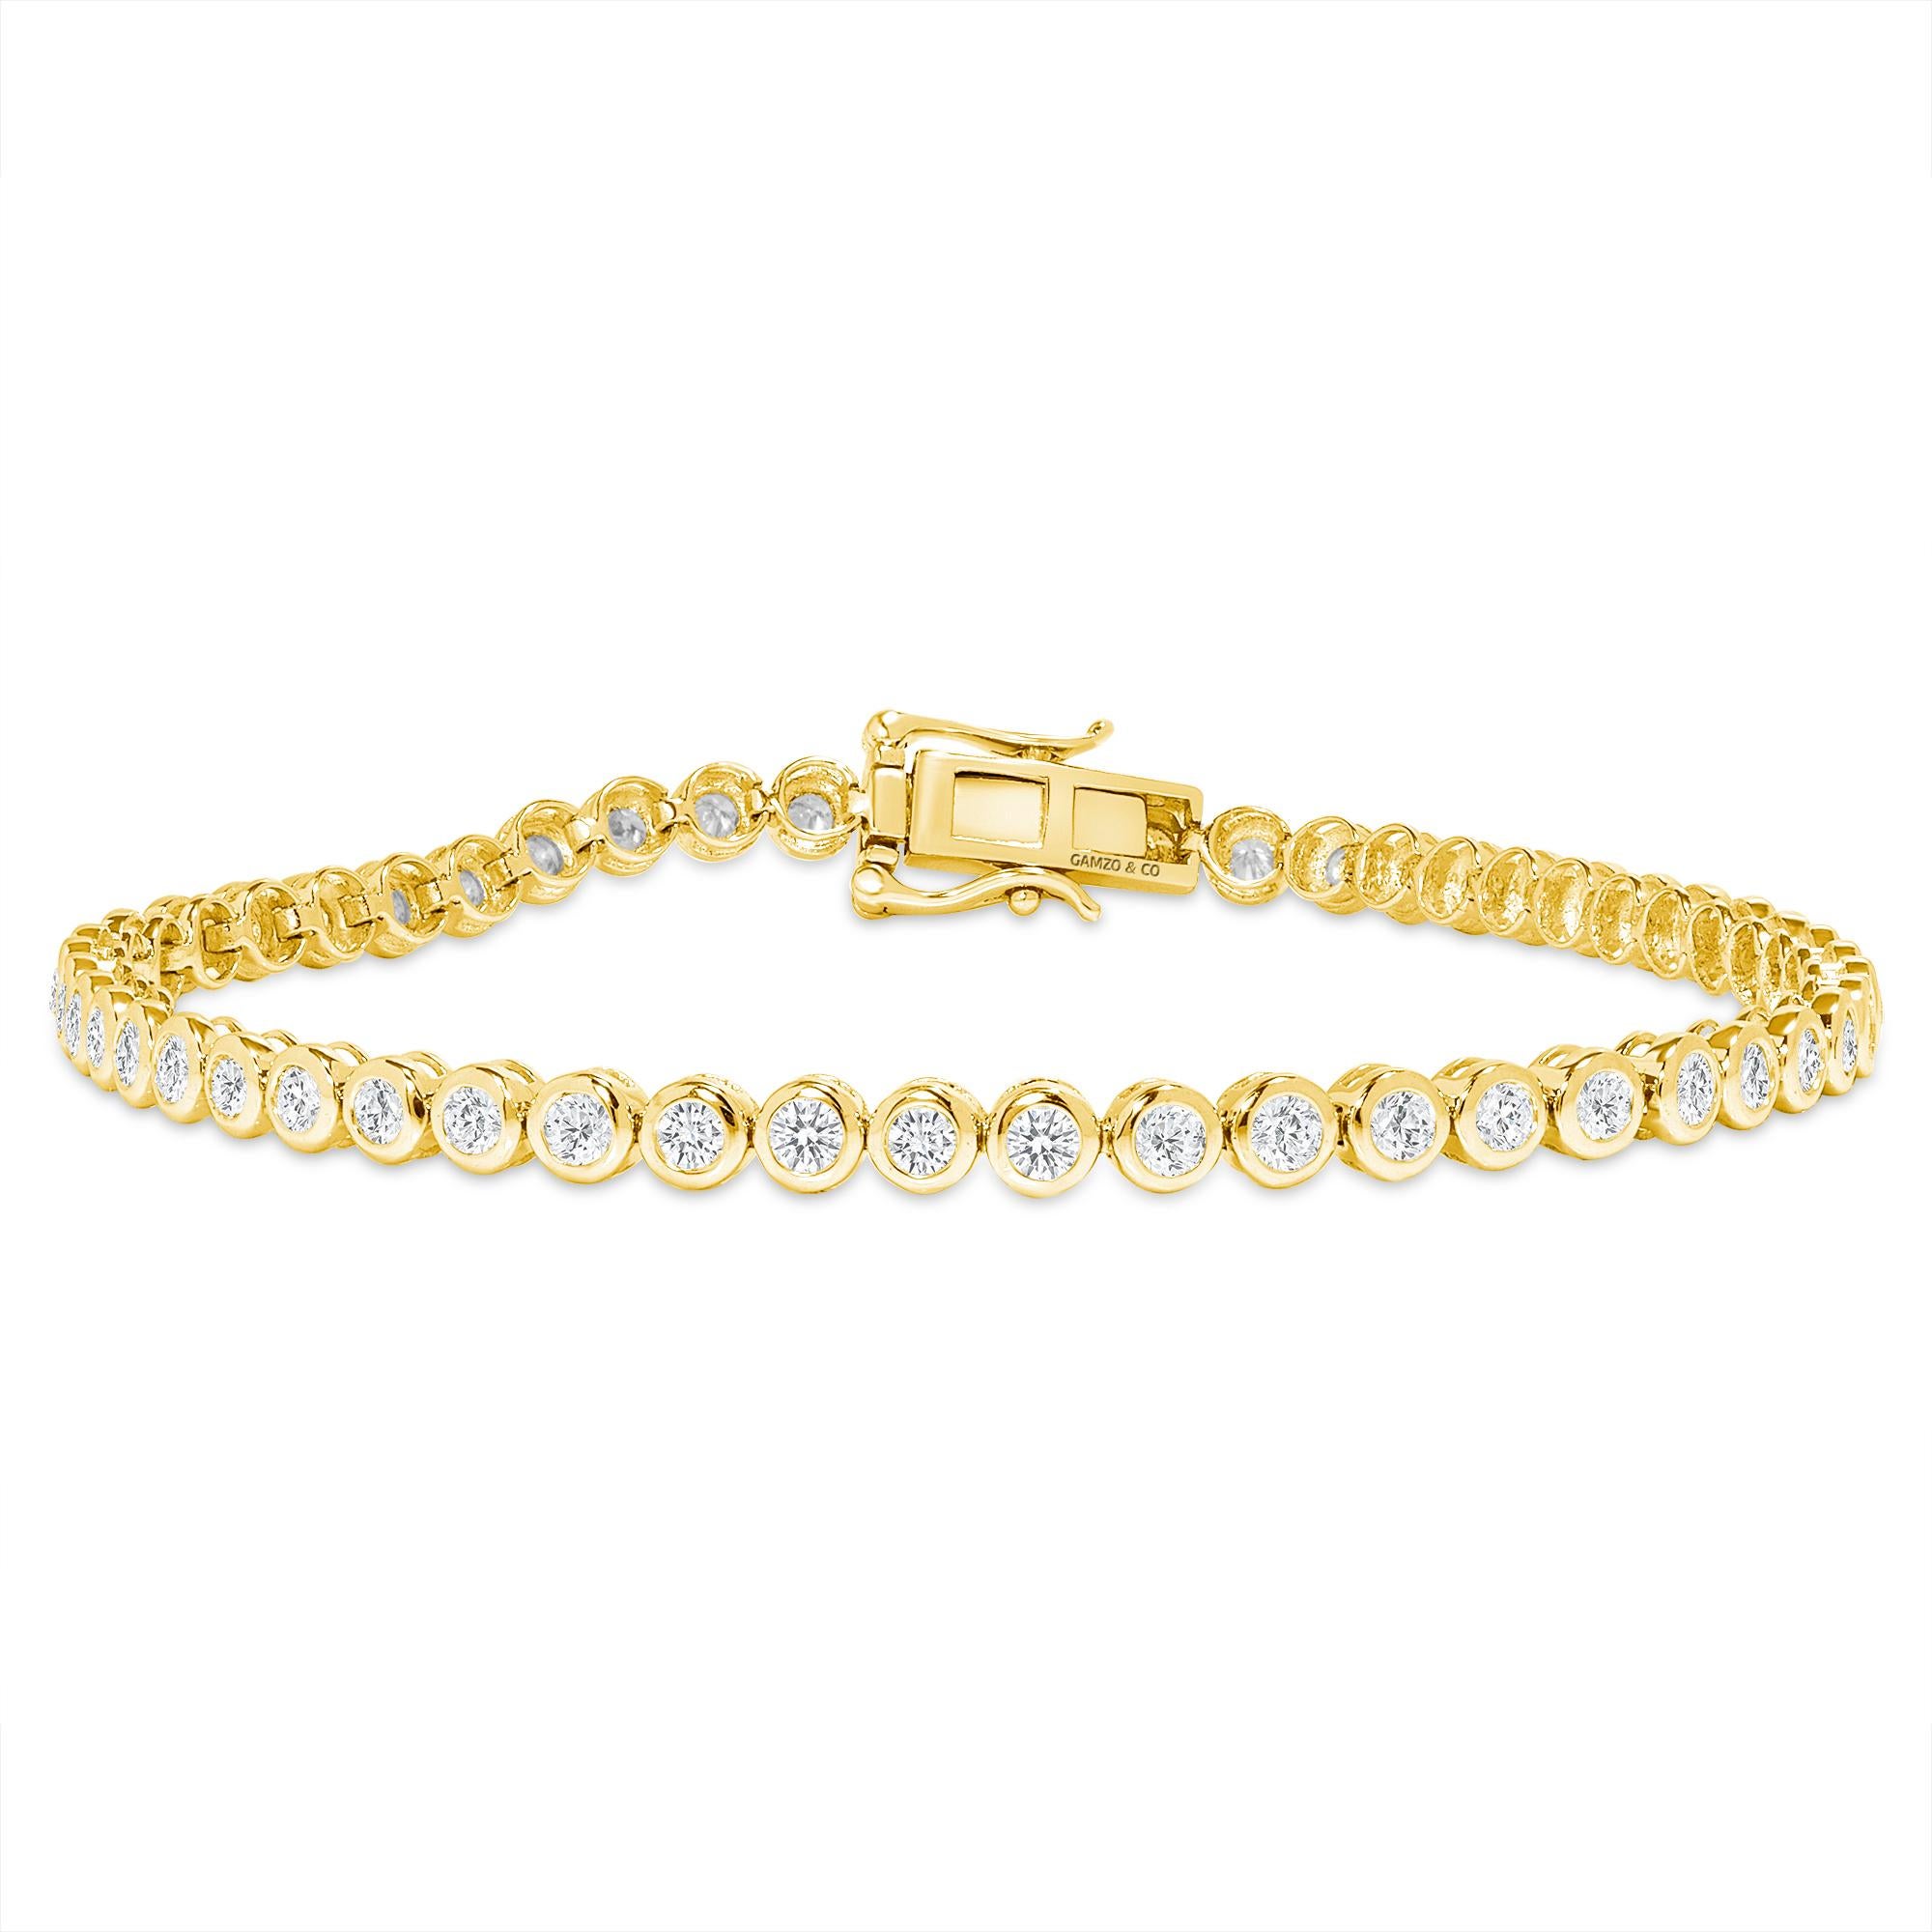 These beautiful round diamonds dance around your wrist as they absorb light and attention.
Metal: 14k Gold
Diamond Cut: Round
Diamond Total Carats: 5ct
Diamond Clarity: VS
Diamond Color: F
Color: Yellow Gold
Bracelet Length: 8 Inches 
Included with